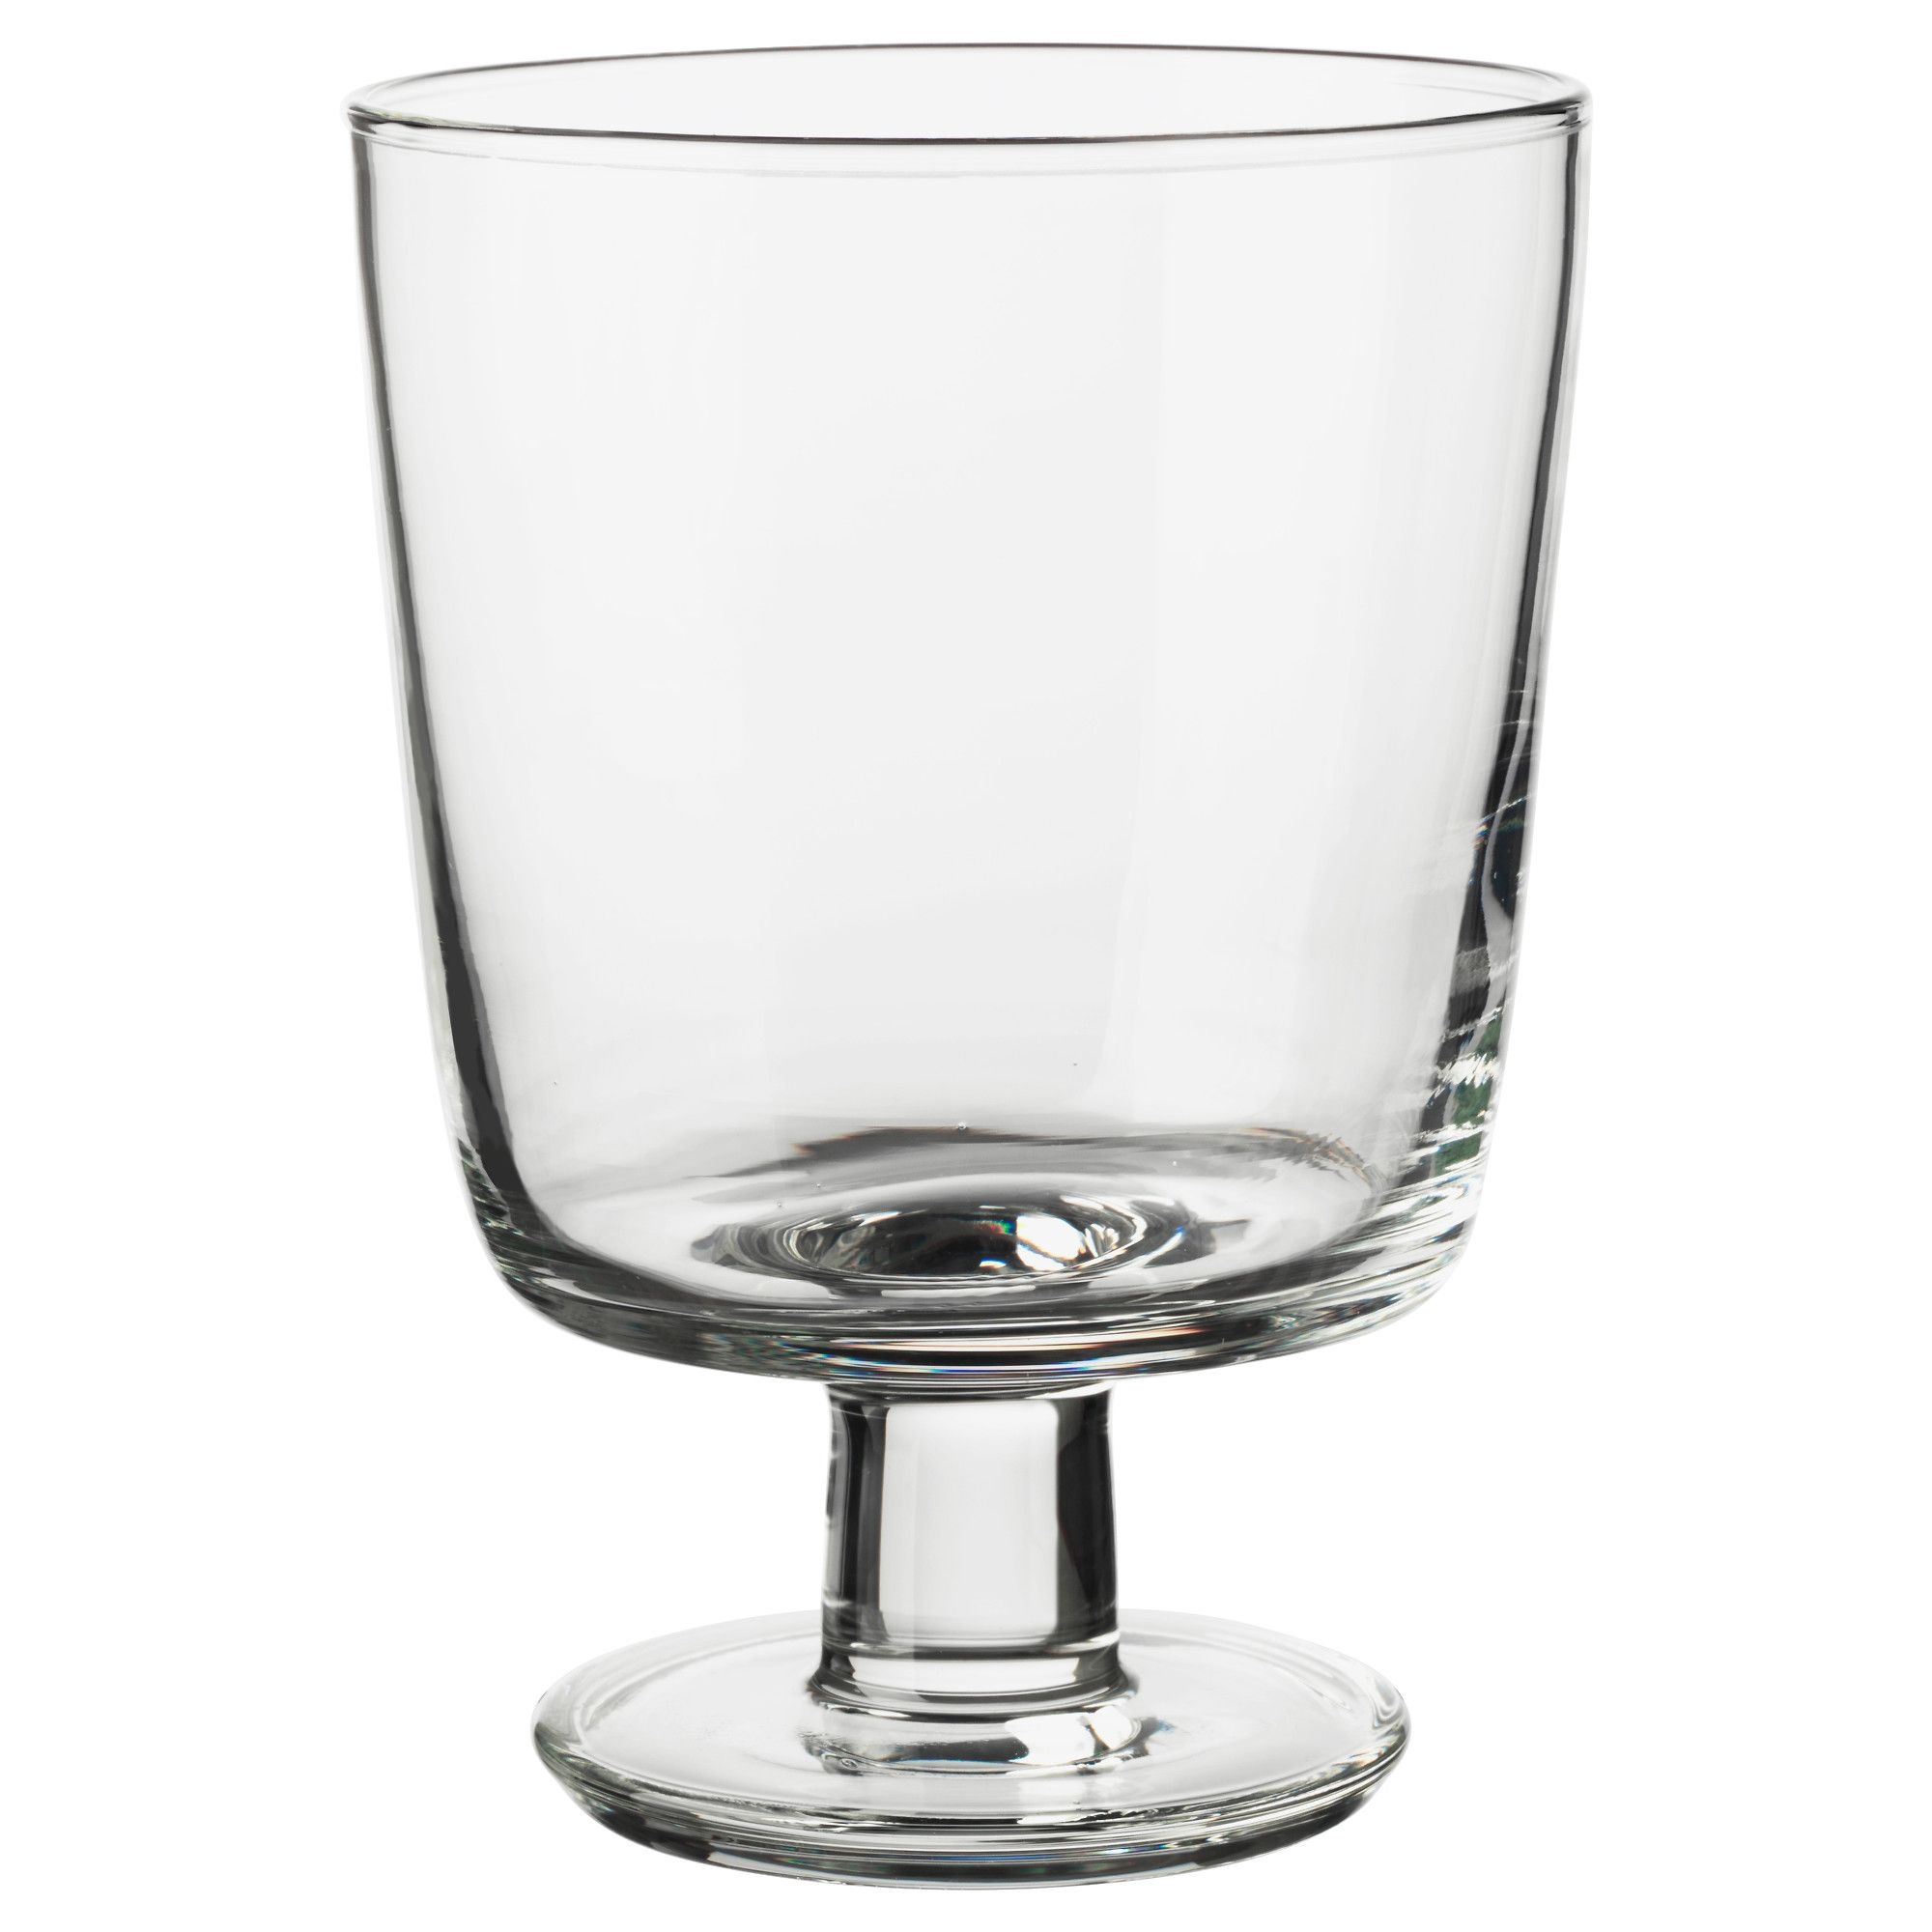 Ikea 365 goblet, Clear glass, High-quality material, 2000x2000 HD Handy